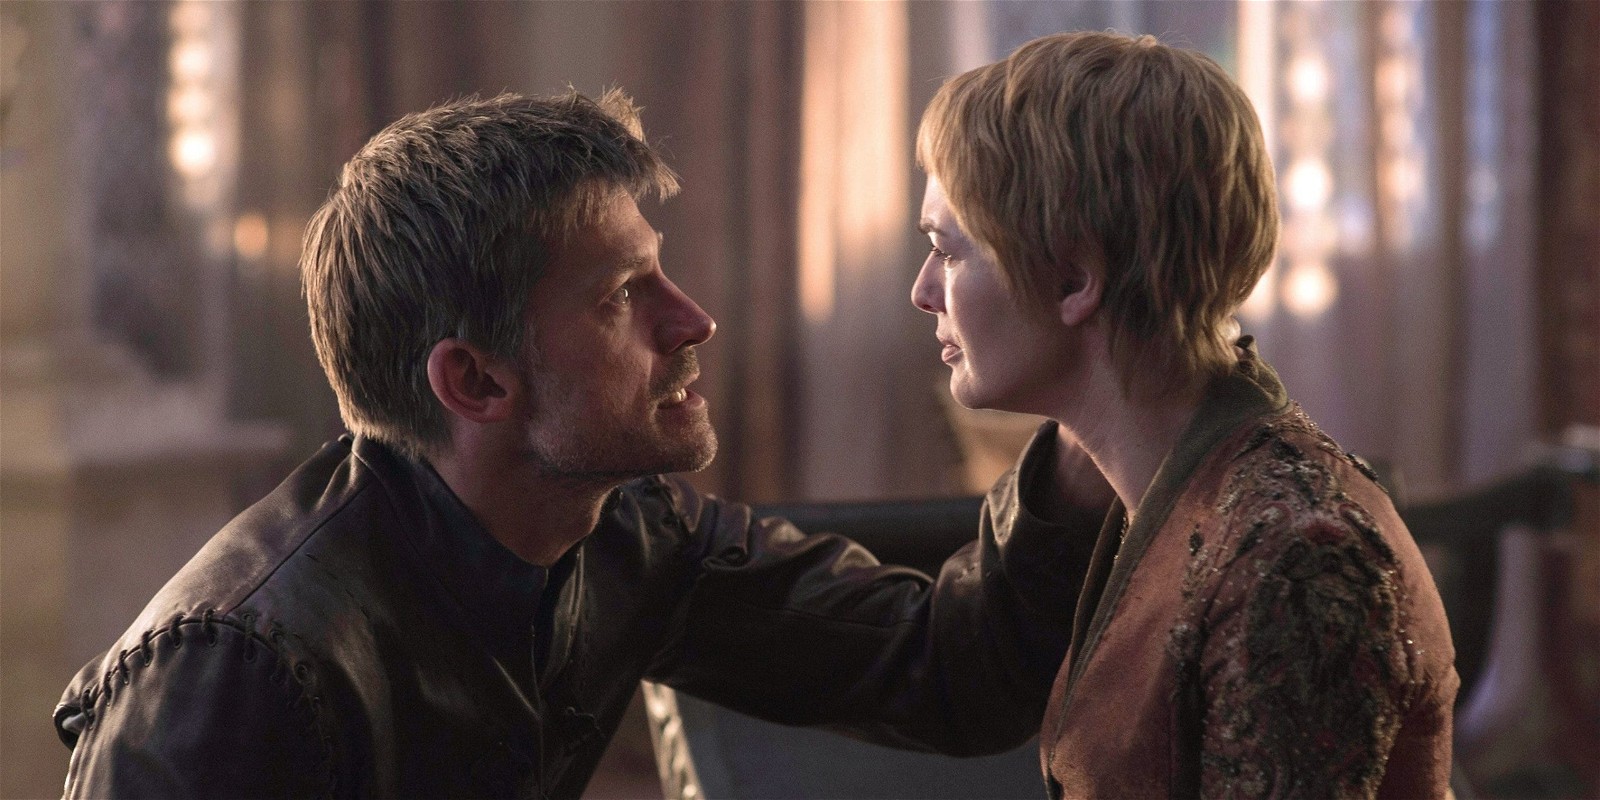 Carsei and Jaime | A still from Game of Thrones